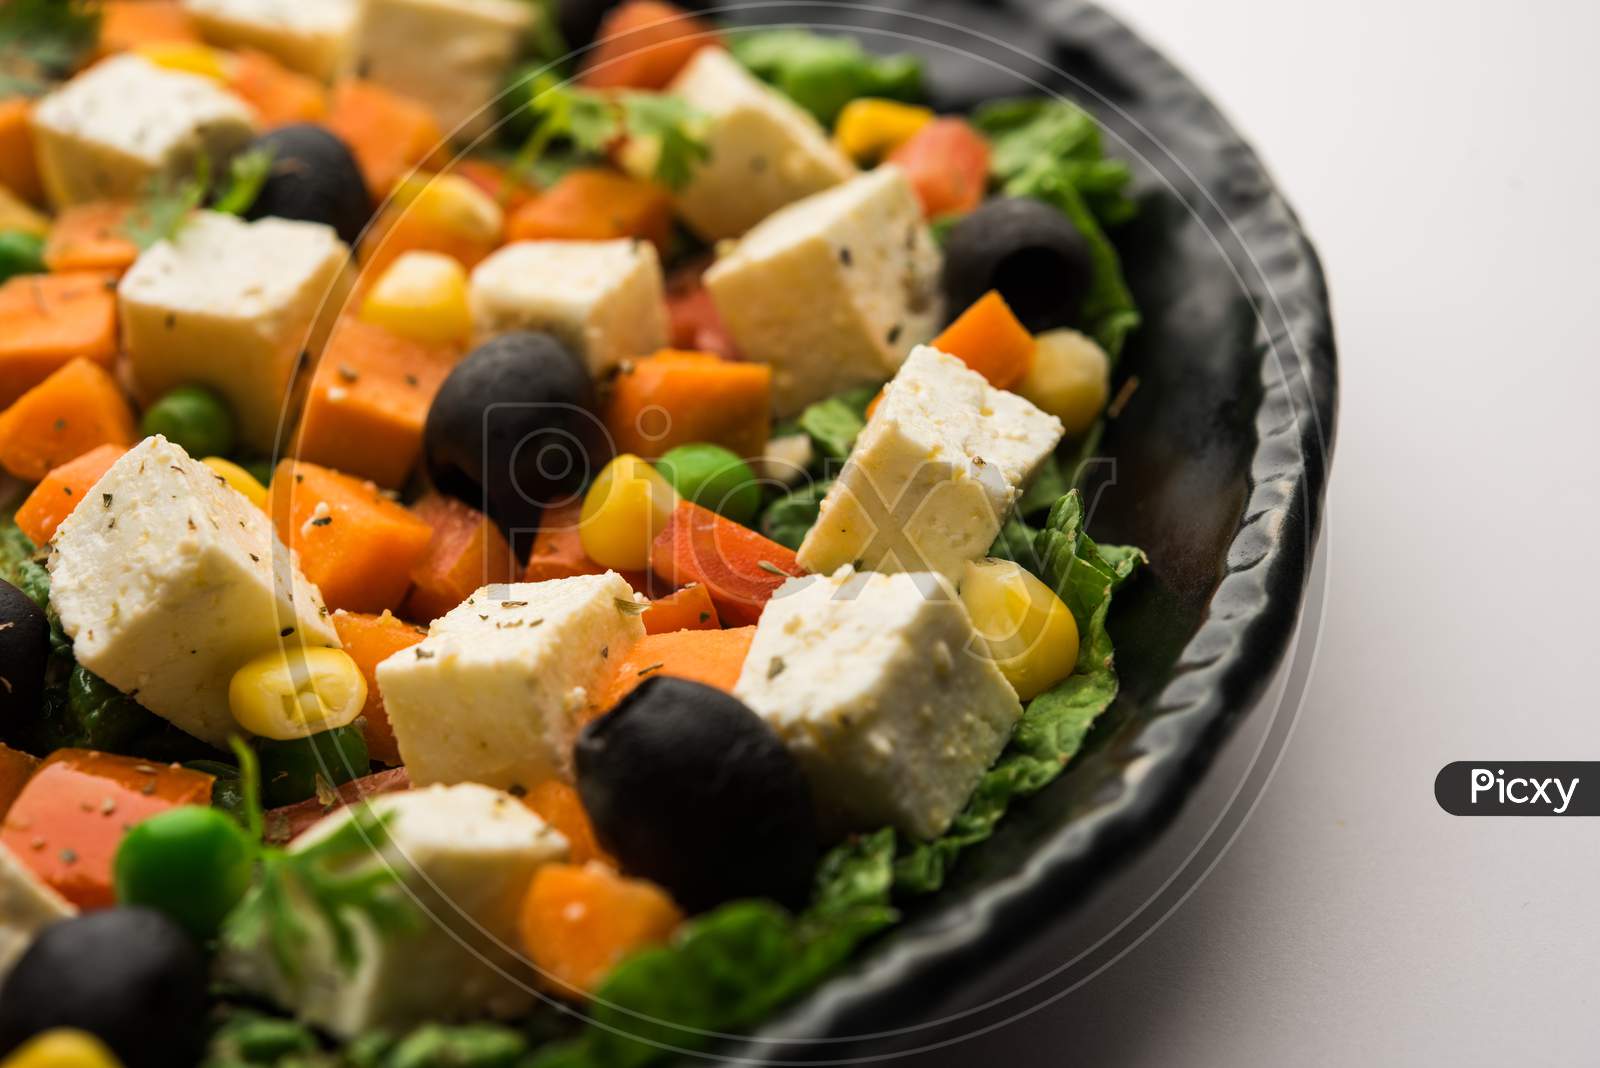 Paneer Vegetable Salad Is A Healthy Indian Recipe Made Using Cottage Cheese And Green Veggies